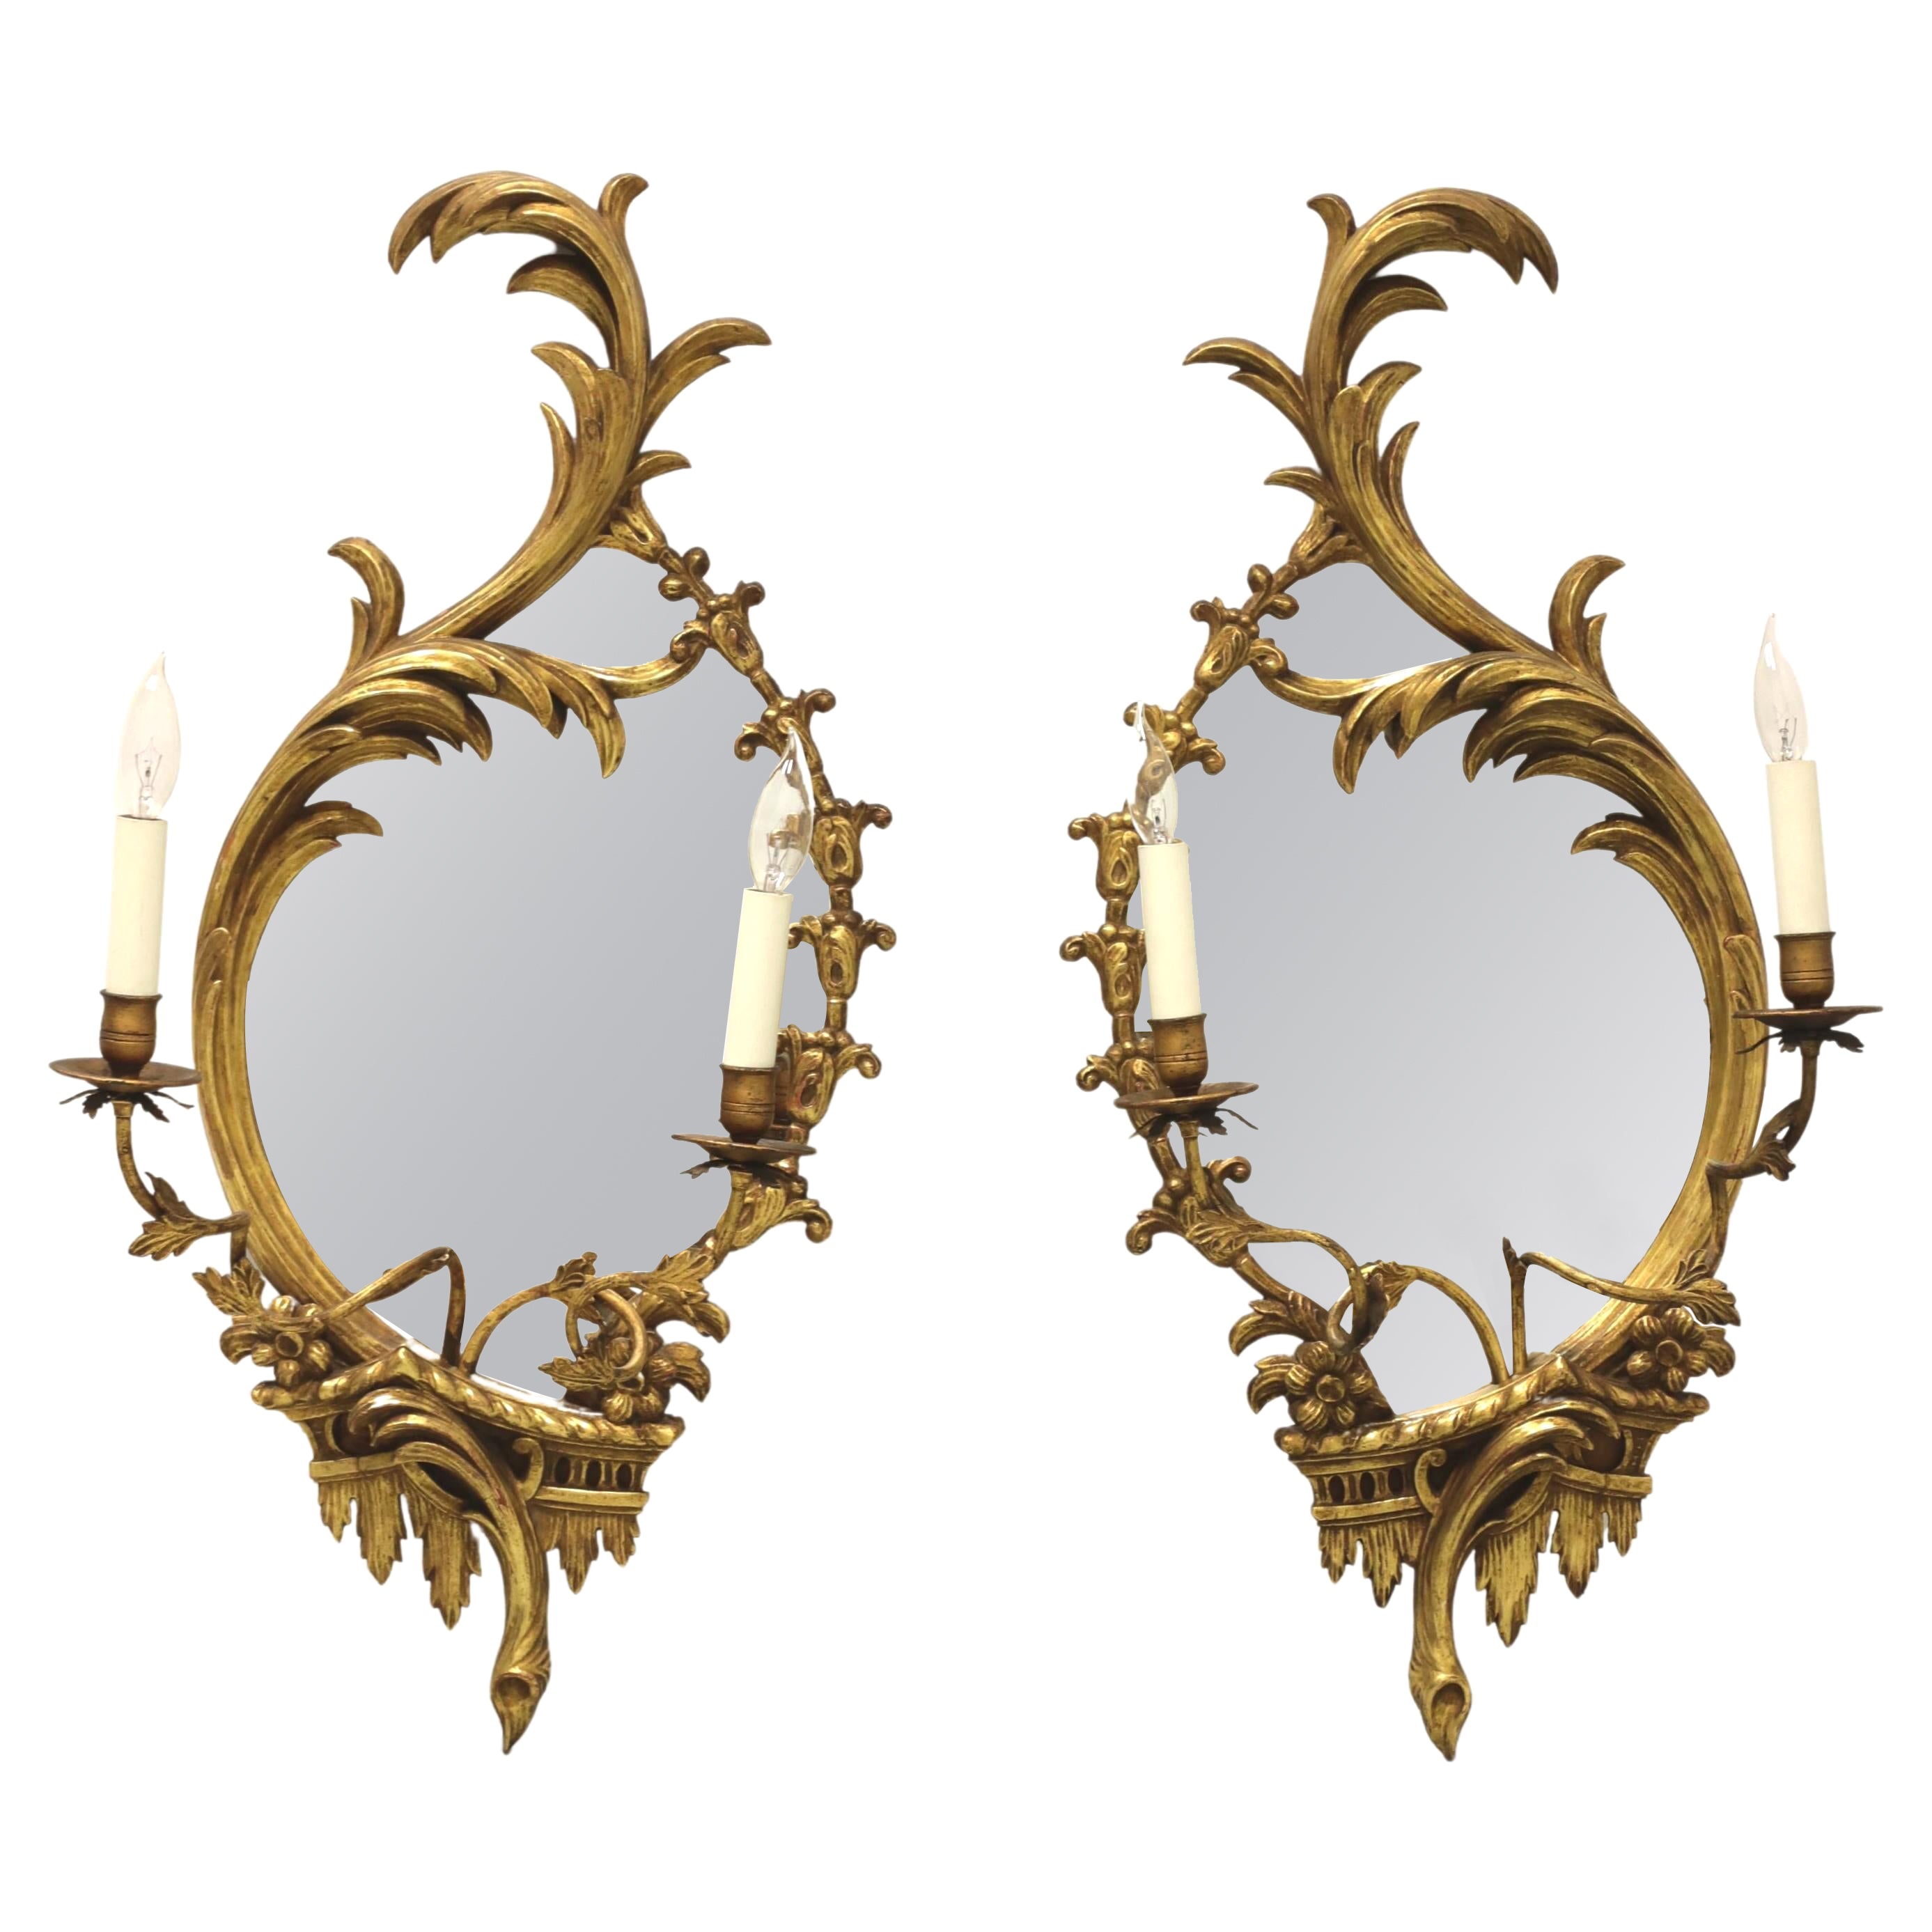 Early 20th Century Carved Wood Electrified Candle Mirror Wall Sconces - Pair A